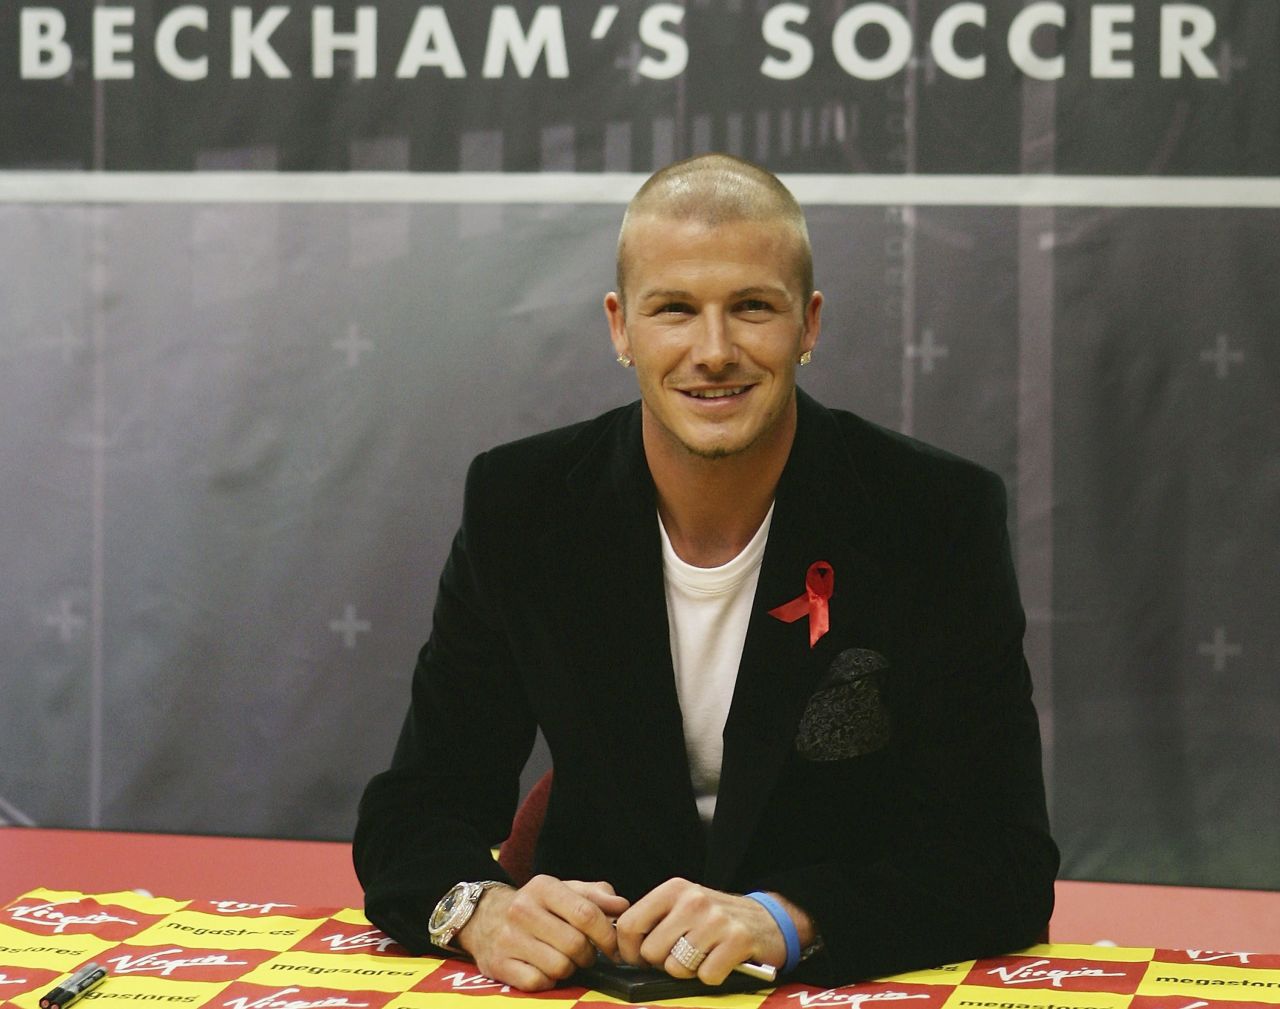 After leaving Manchester United for Real Madrid in 2003, his follicles were regularly the focus of media attention. Here a shaven-headed Beckham promotes his first official training skills DVD -- "Really Bend It Like Beckham," a title referring to the 2002 British film starring a young Keira Knightley as an aspiring footballer.